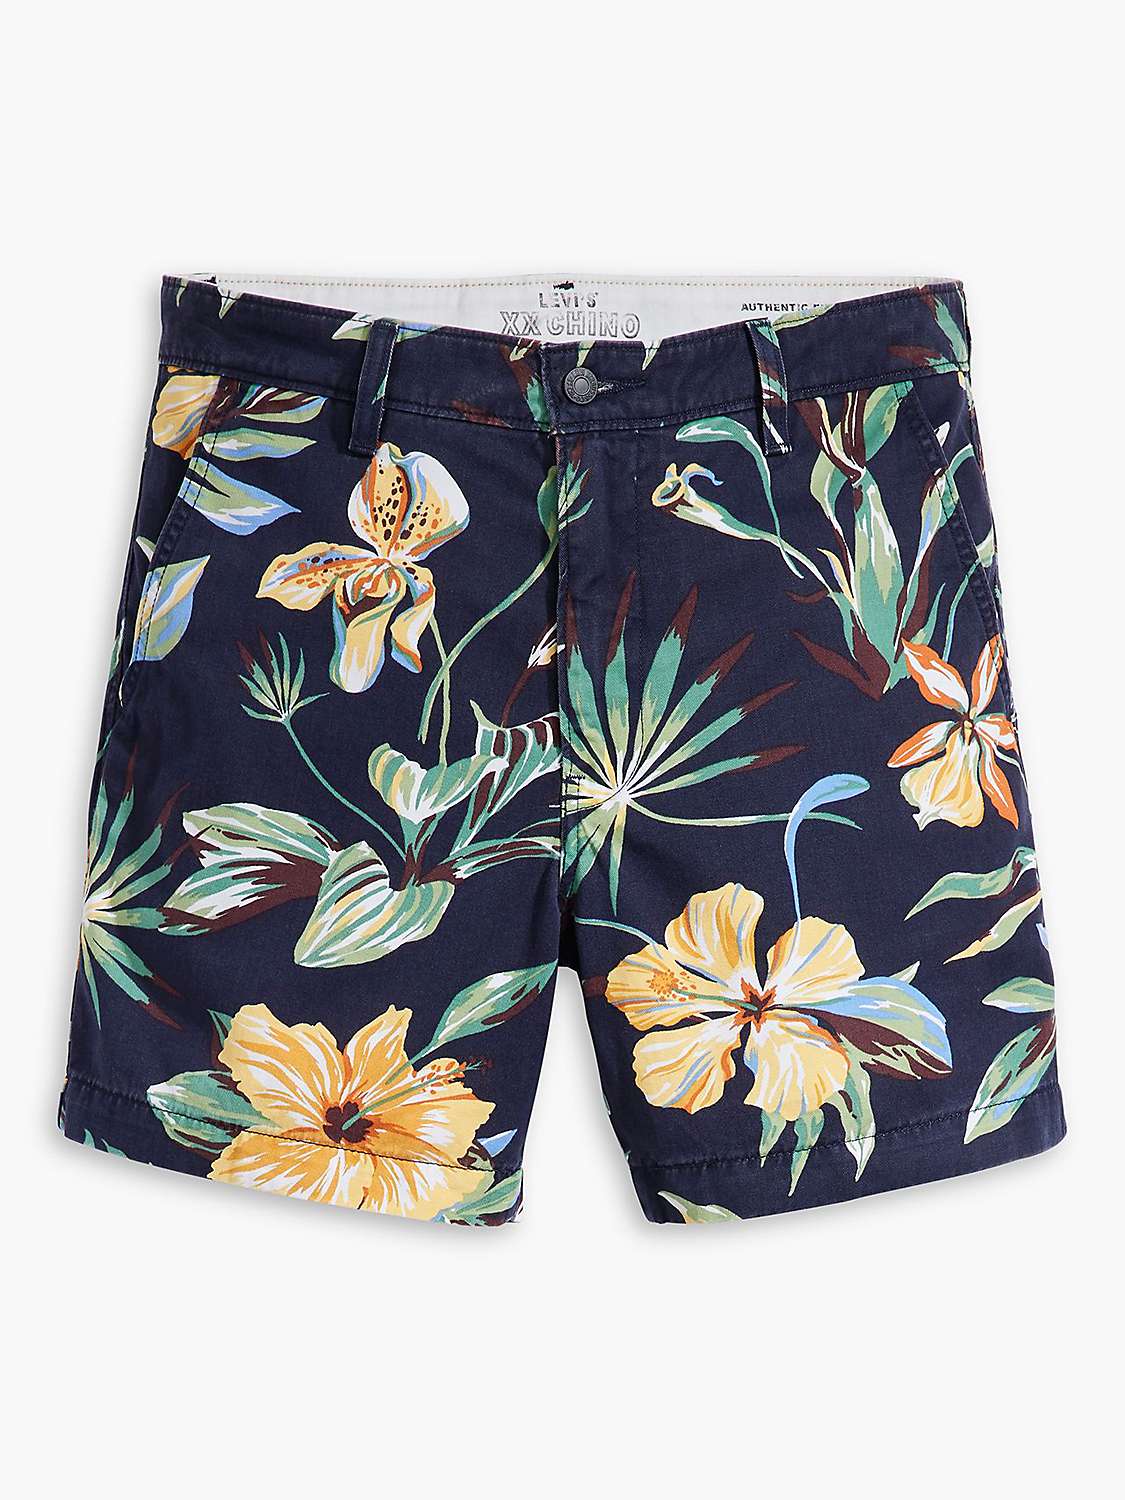 Buy Levi's XX Authentic Chino Shorts, Navy/Multi Online at johnlewis.com